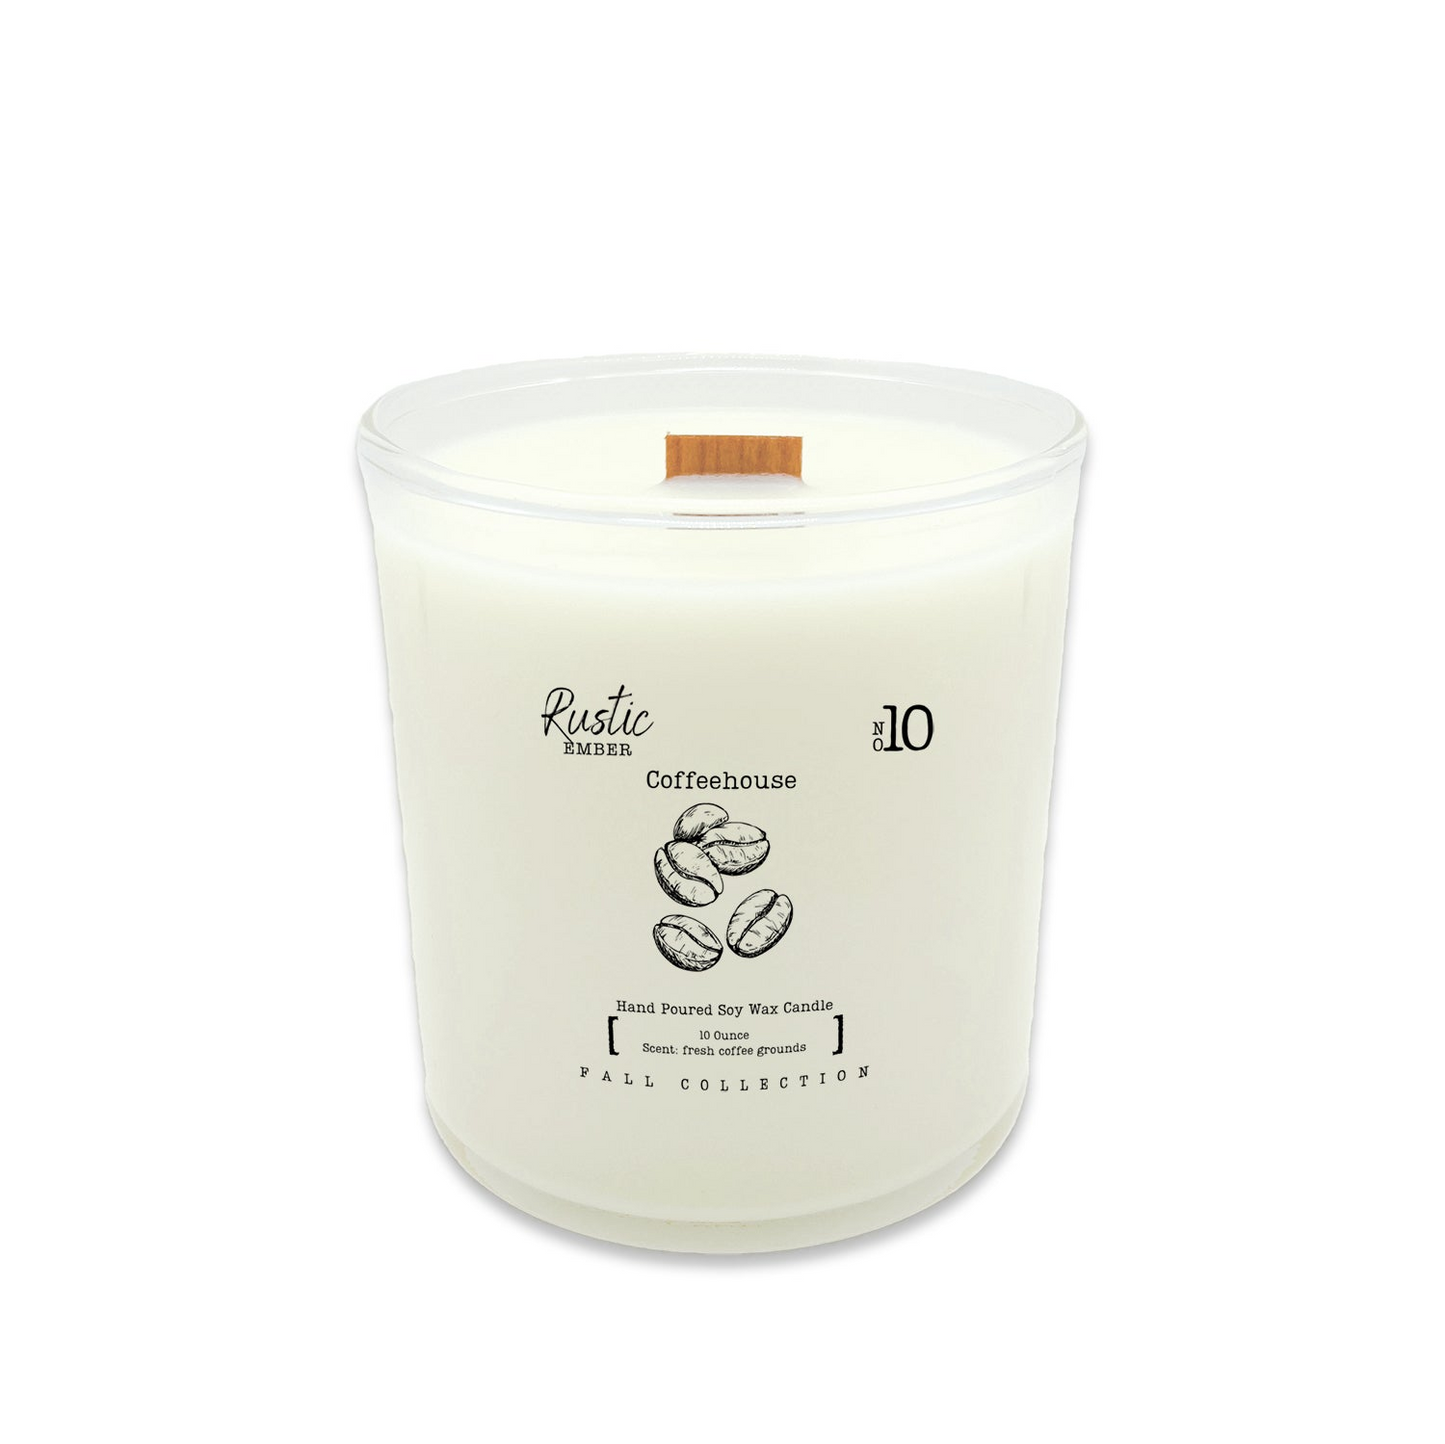 Coffeehouse | 10 Ounce Candle | Rustic Ember